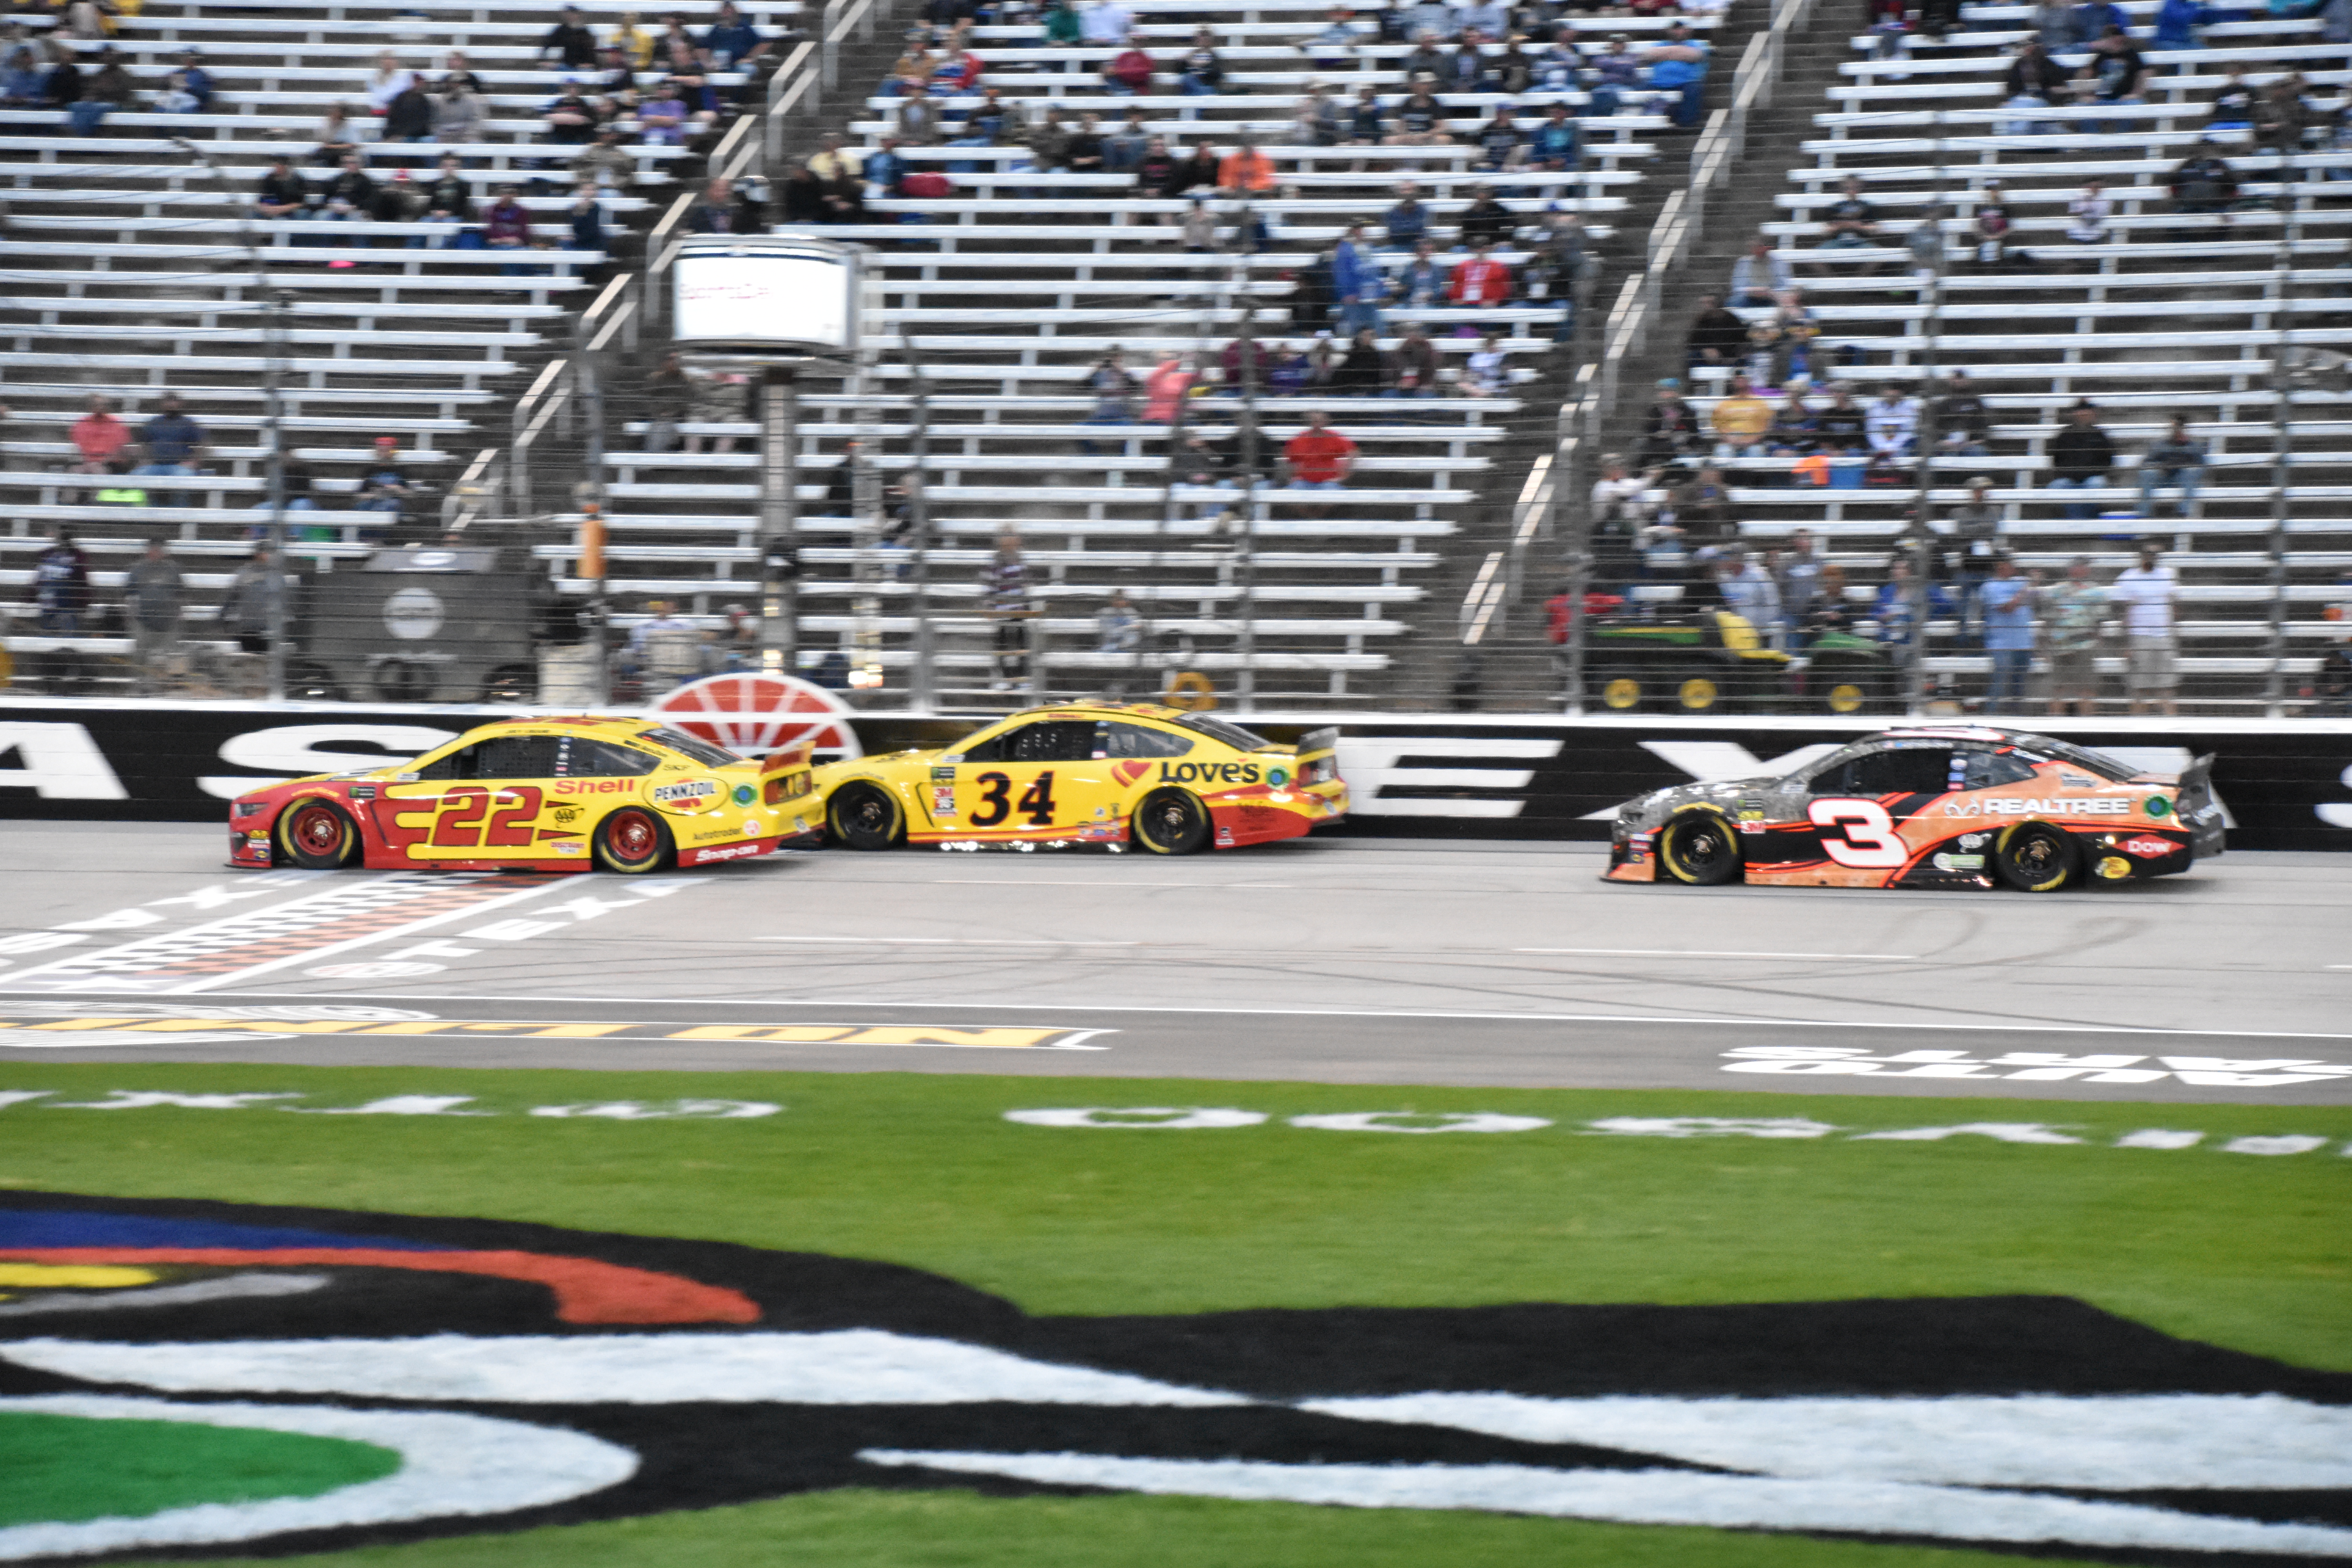 While providing elements of race day and a countdown clock, might NASCAR need to reconsider group qualifying at future races? (Photo Credit: Sean Folsom/TPF)